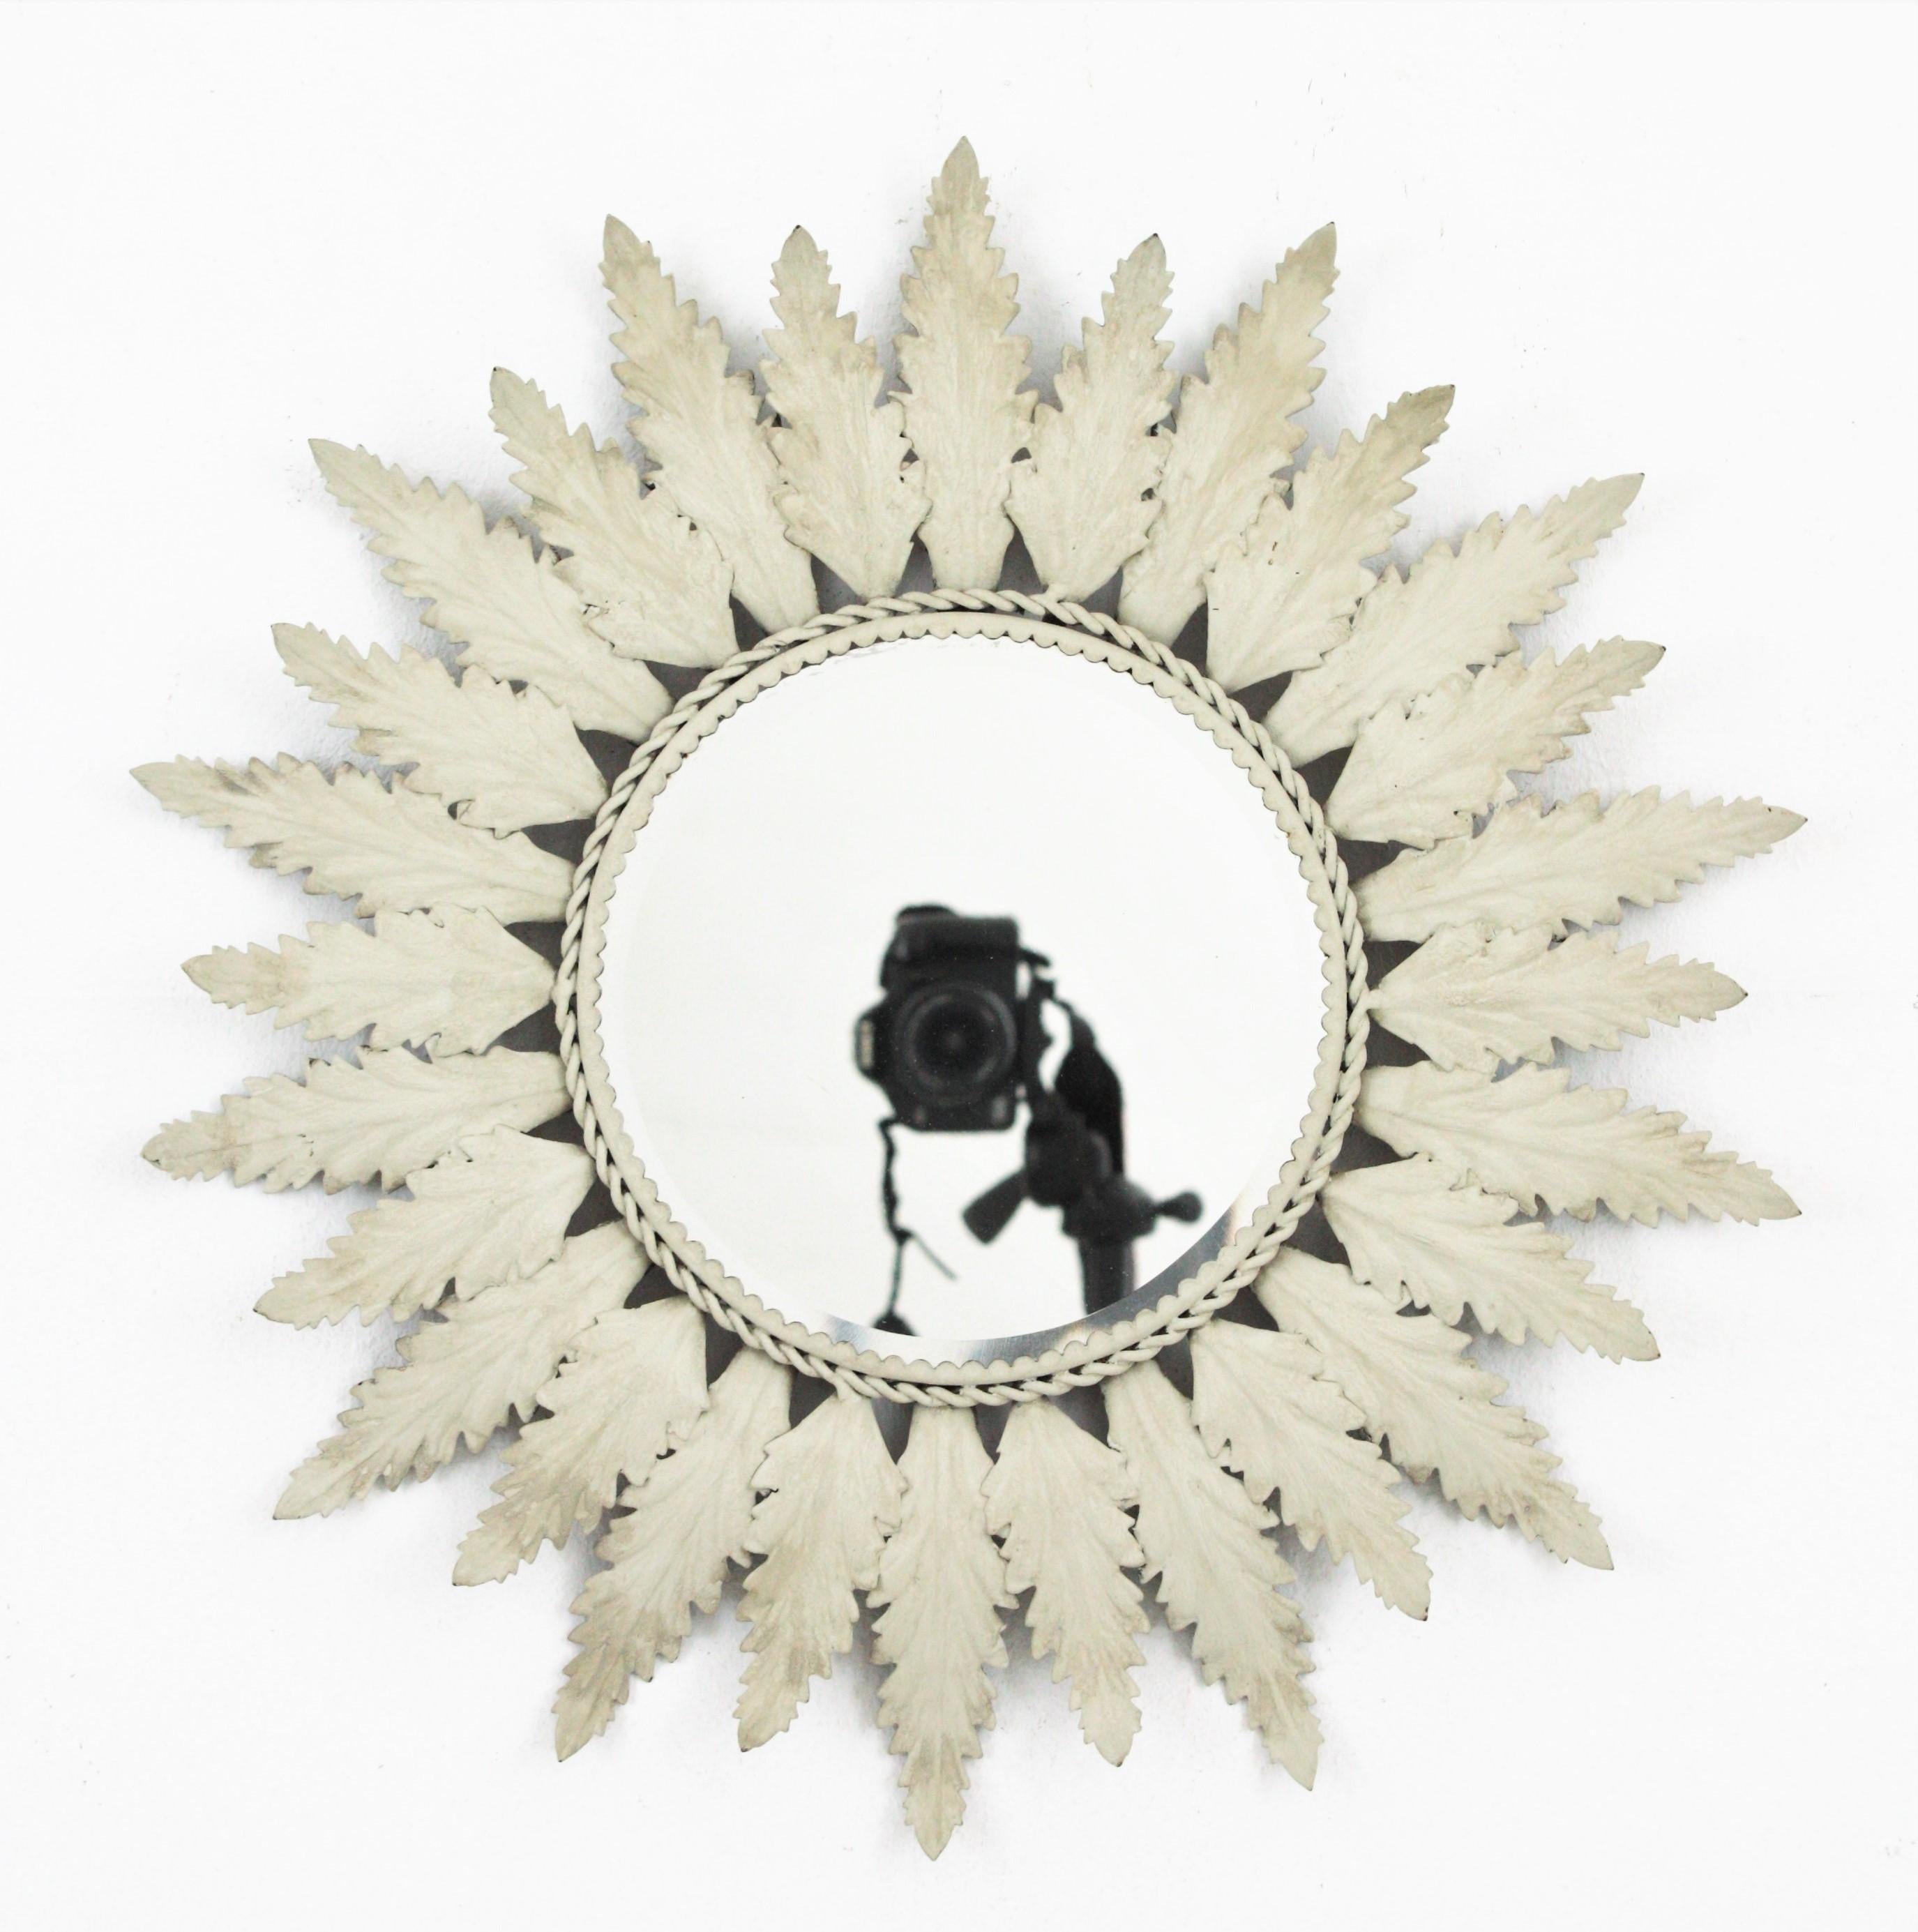 Eye-catching metal sunburst or flower shaped mirror with white-grey matte patina, Spain, 1960s
This lovely sunburst has alternating leaves in two sizes surrounding a central round beveled glass. This mirror will be a nice addition in a country